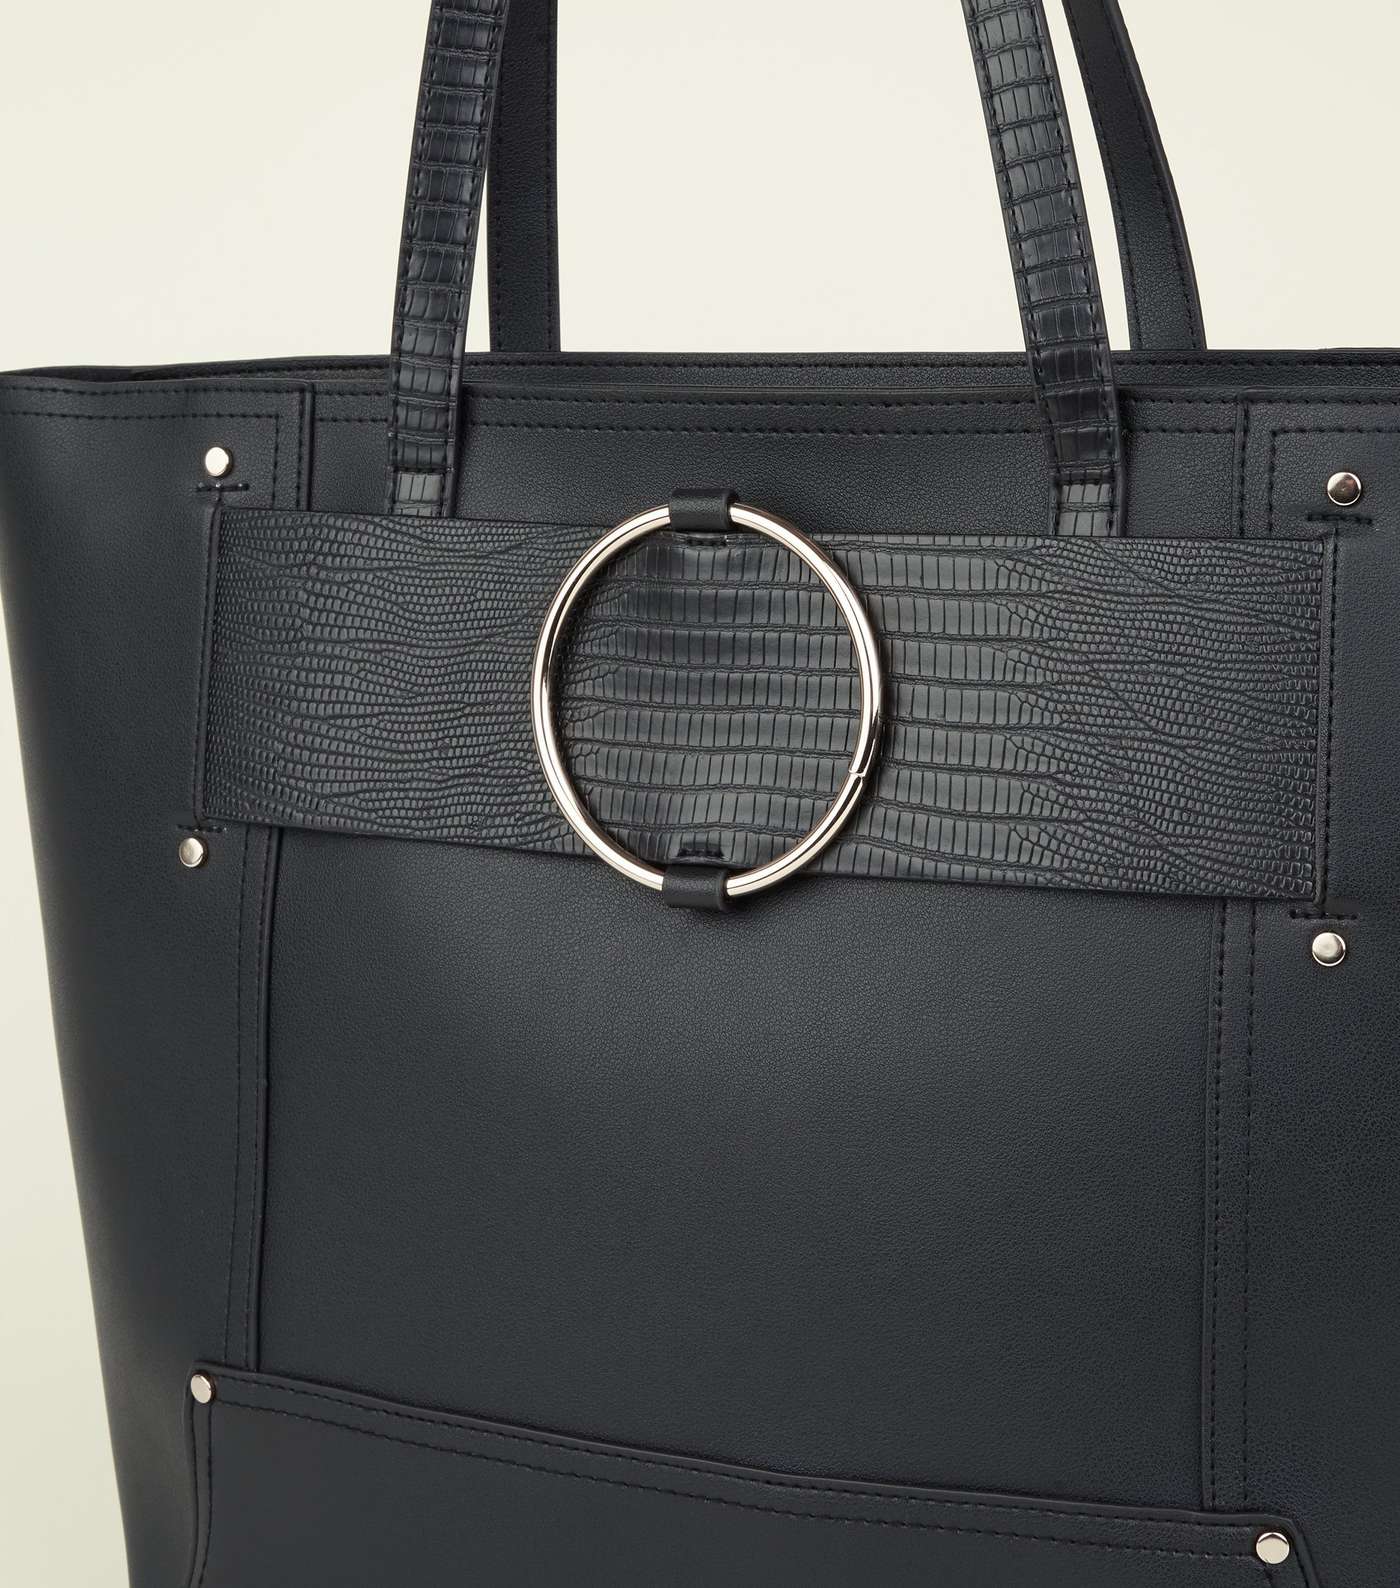 Black Leather-Look Ring Strap Tote Bag Image 3